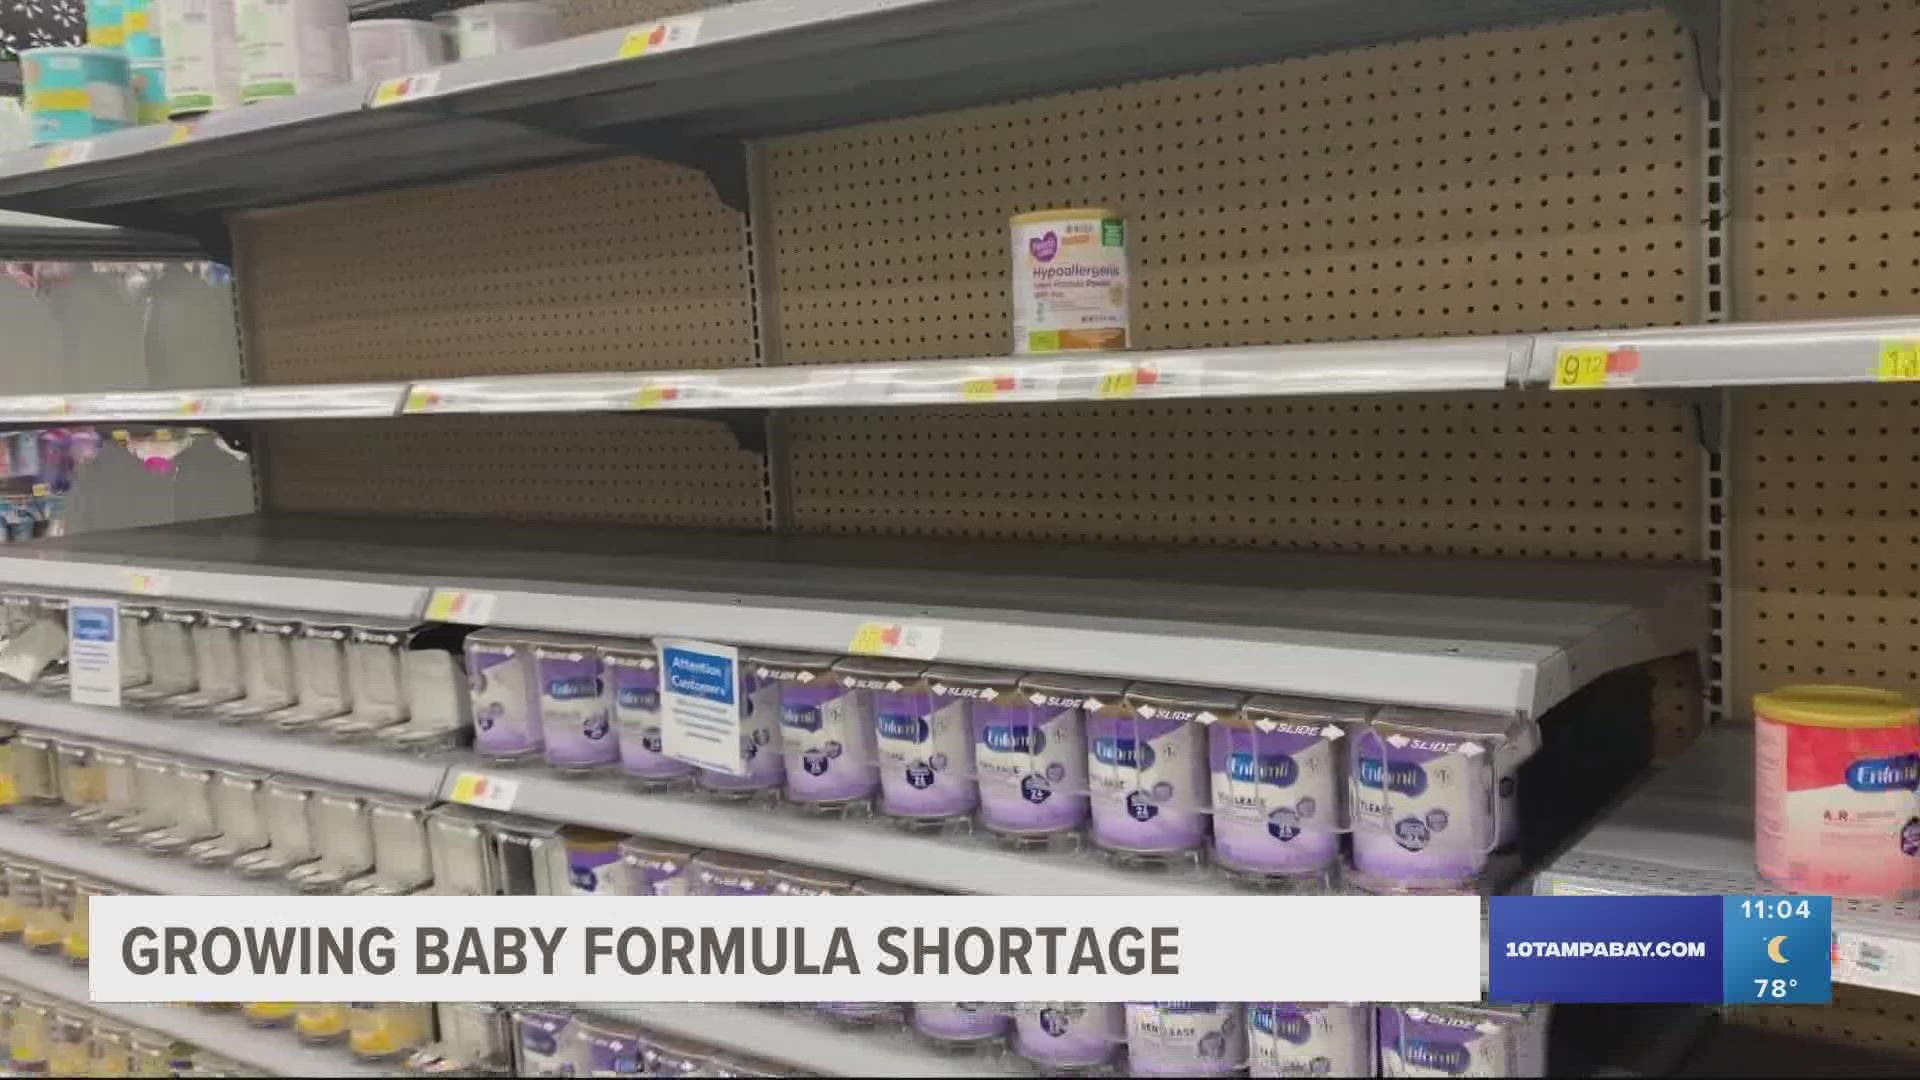 This week, the agency is expected to announce how it plans to increase imports of infant formula from abroad without changing safety and quality standards.